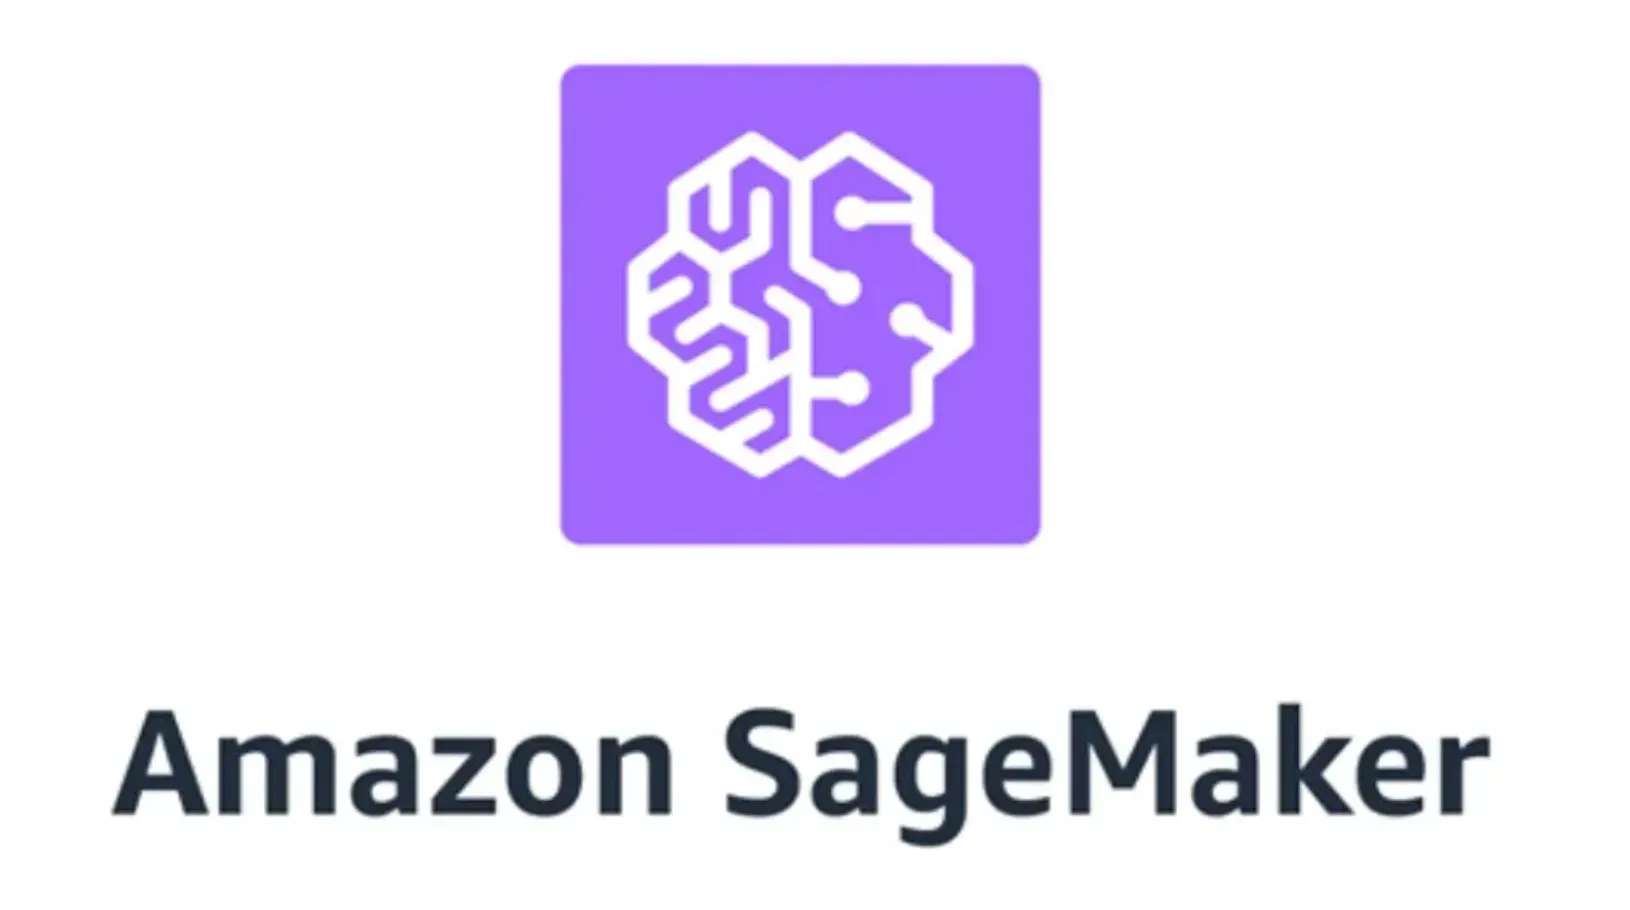 Challenges with using Amazon SageMaker?